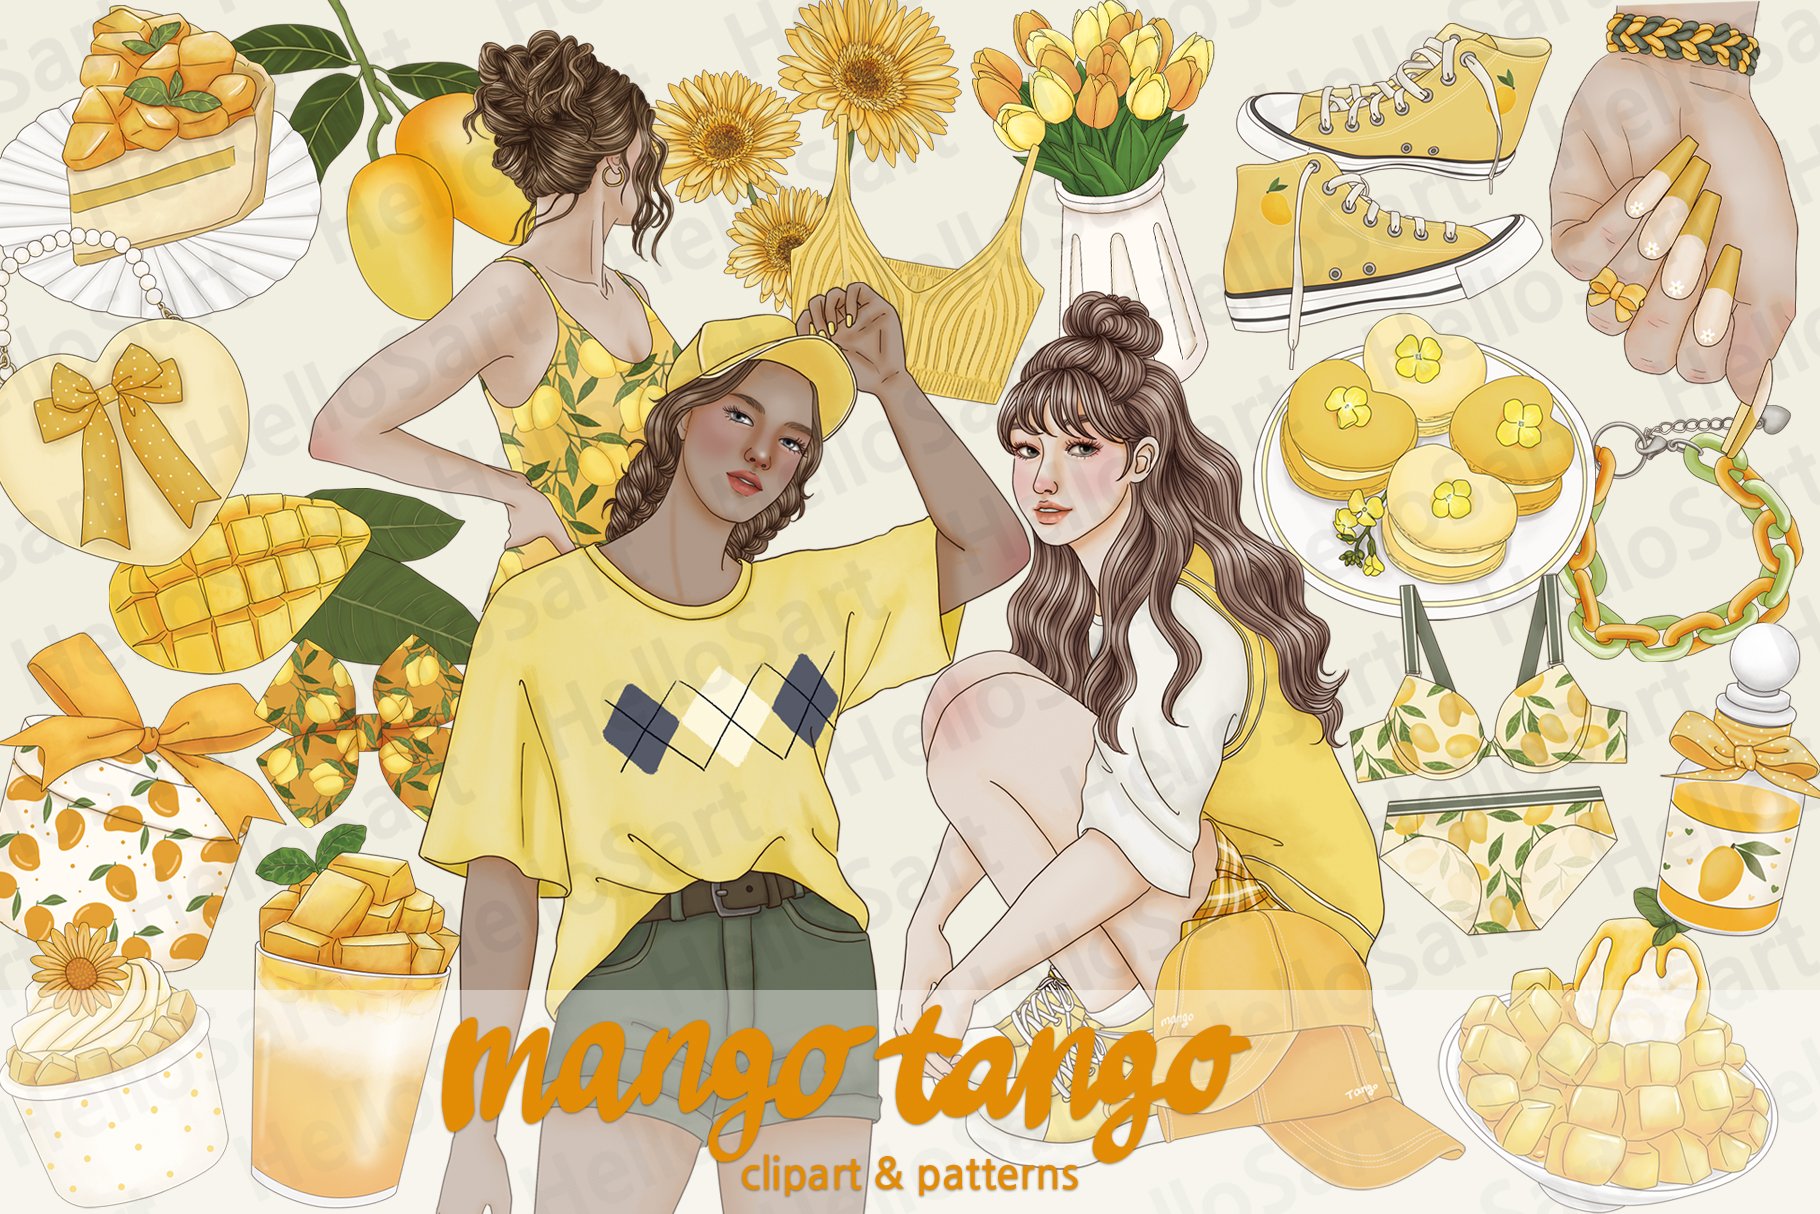 Mango Tango Clipart & Patterns cover image.